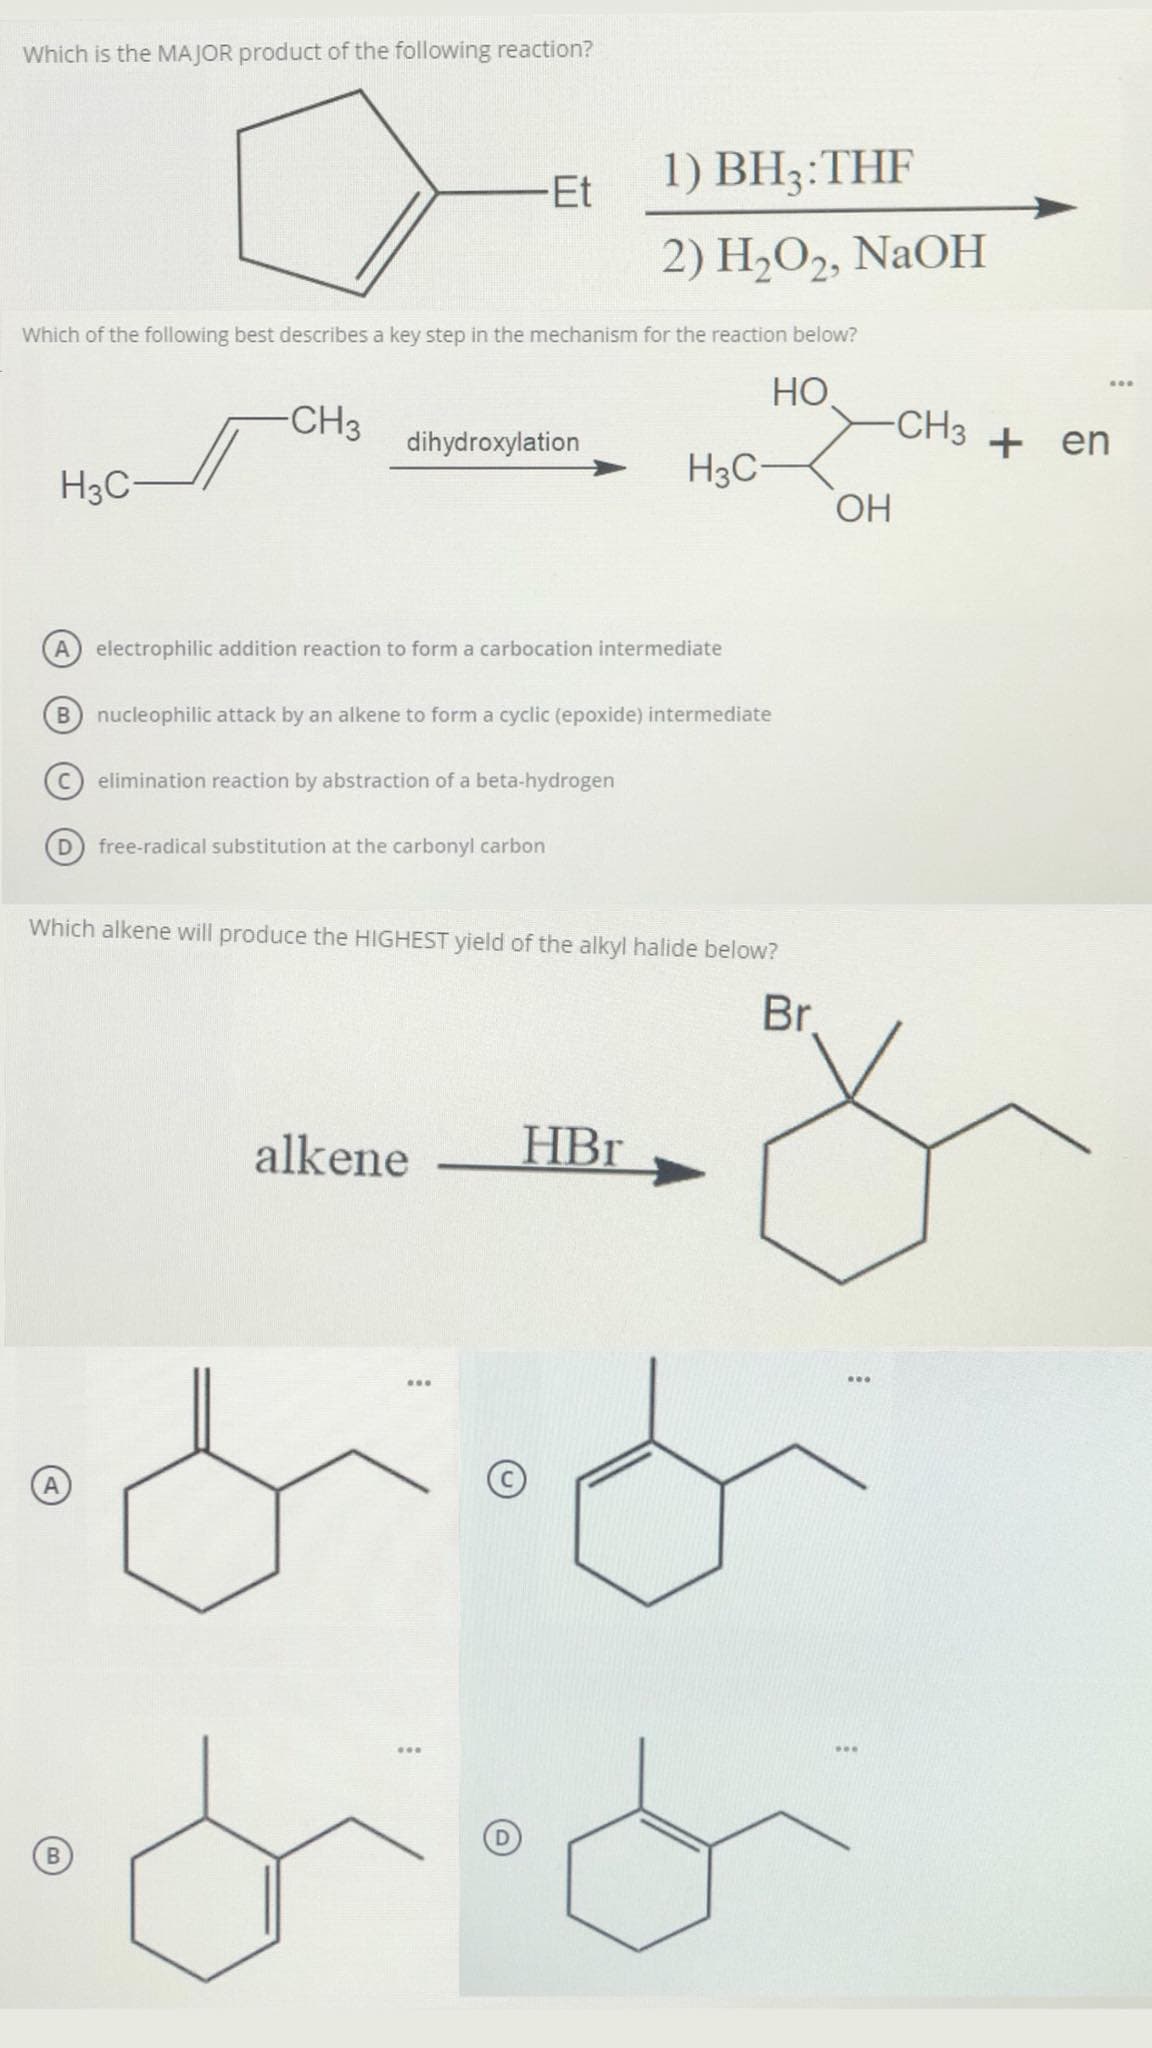 Which is the MAJOR product of the following reaction?
Et
1) BH3:THF
2) H2O2, NaOH
Which of the following best describes a key step in the mechanism for the reaction below?
HO
...
CH3
-CH3
dihydroxylation
+ en
H3C-
H3C-
HO.
electrophilic addition reaction to form a carbocation intermediate
B nucleophilic attack by an alkene to form a cyclic (epoxide) intermediate
elimination reaction by abstraction of a beta-hydrogen
D
free-radical substitution at the carbonyl carbon
Which alkene will produce the HIGHEST yield of the alkyl halide below?
Br.
alkene
HBr
|
